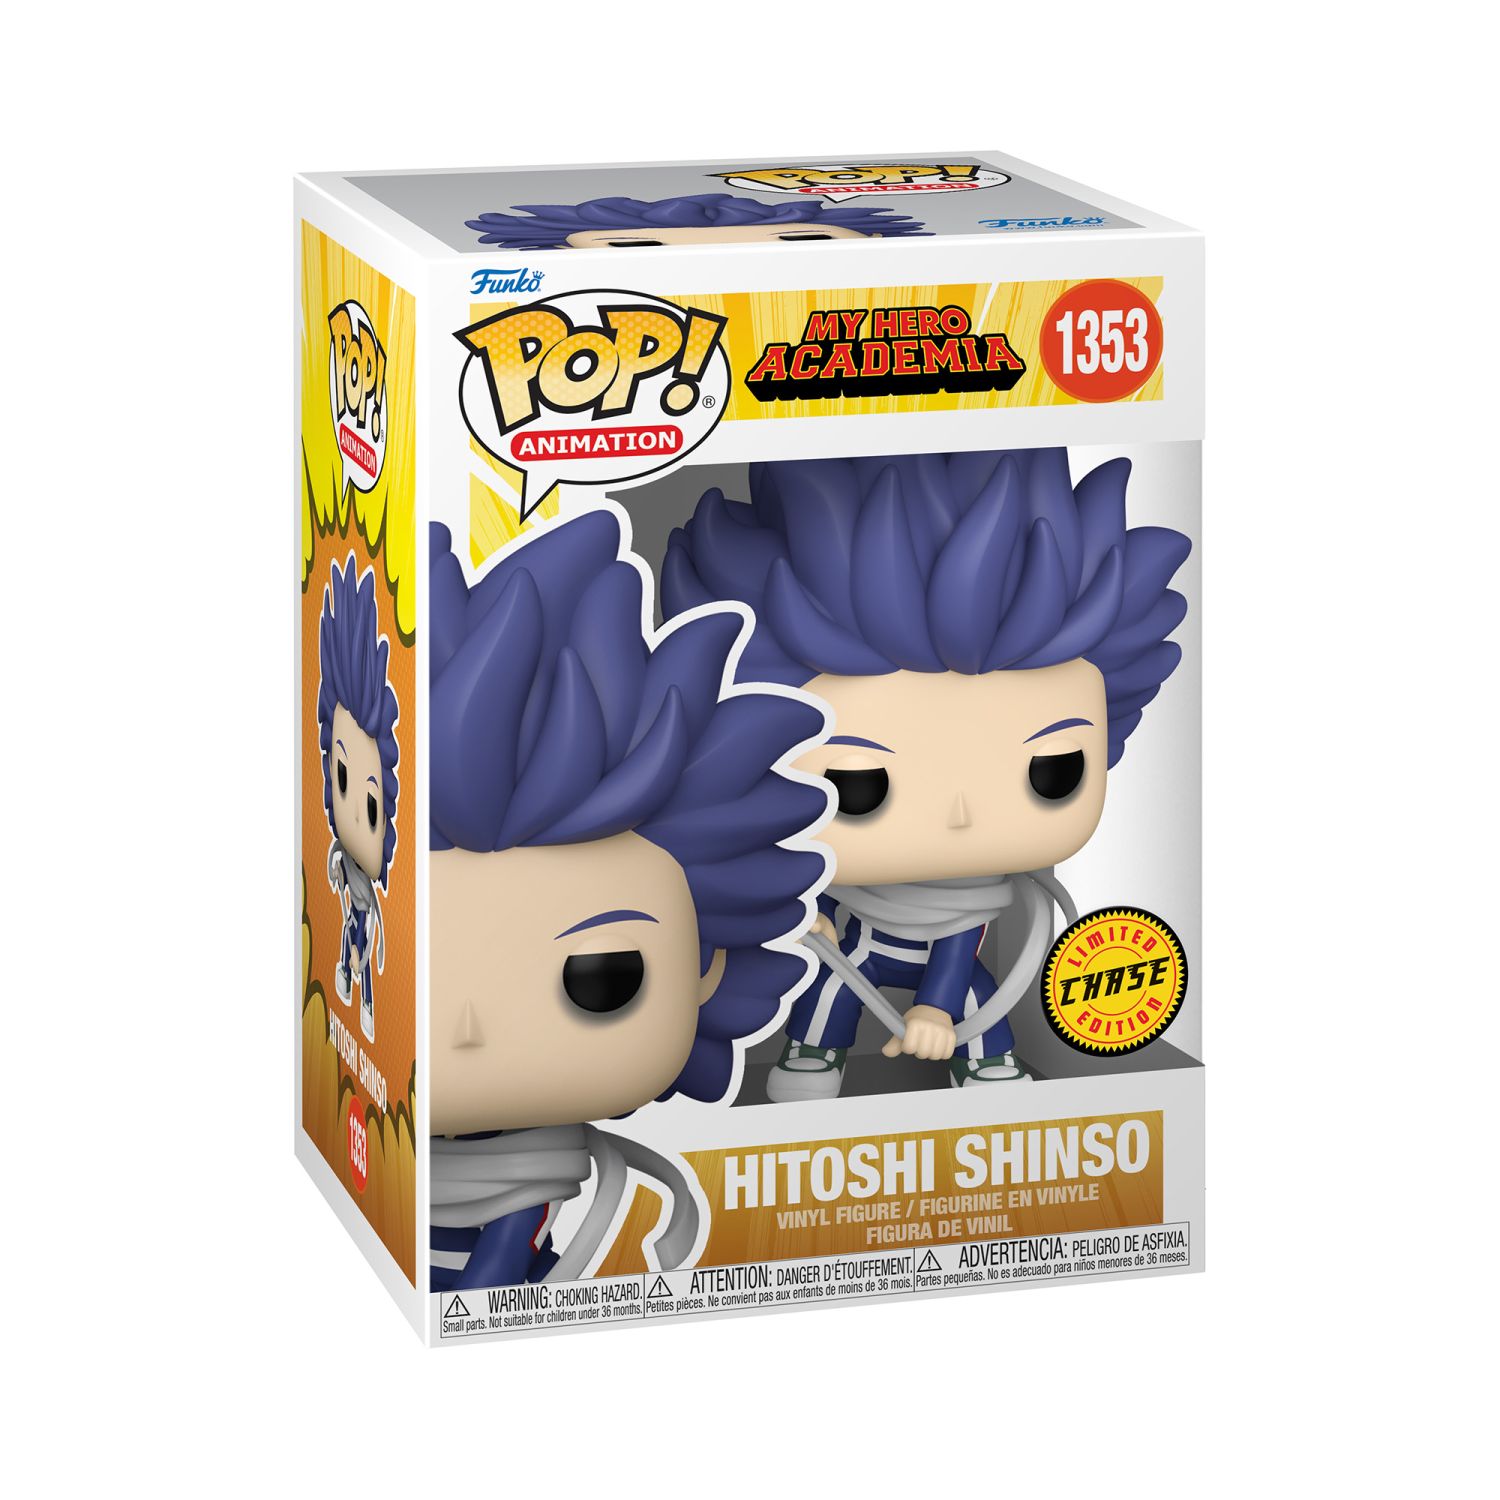 There is a 1 in 6 chance you may find the chase of Hitoshi Shinso with mask. Vinyl figure is approximately 4.6-inches tall.